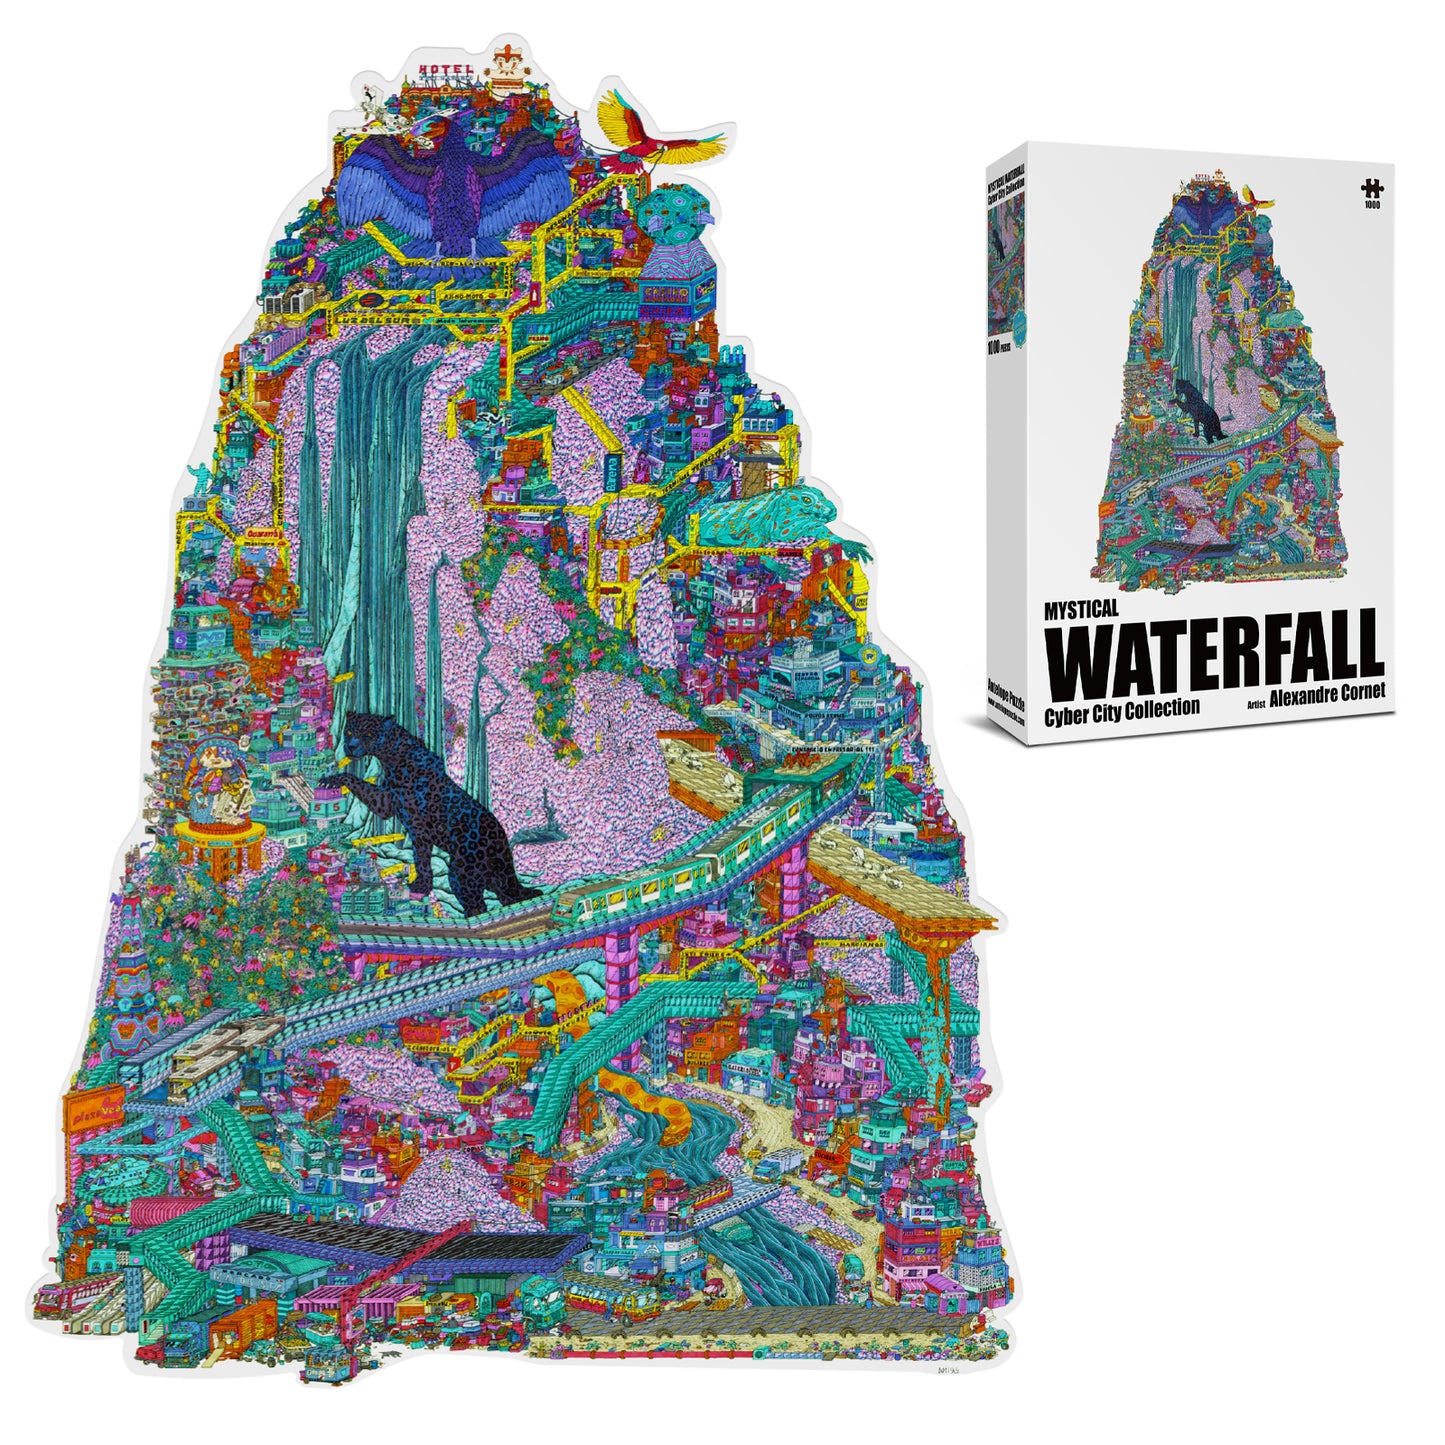 The Mystical Waterfall Cyber City 1000 Piece Jigsaw Puzzle